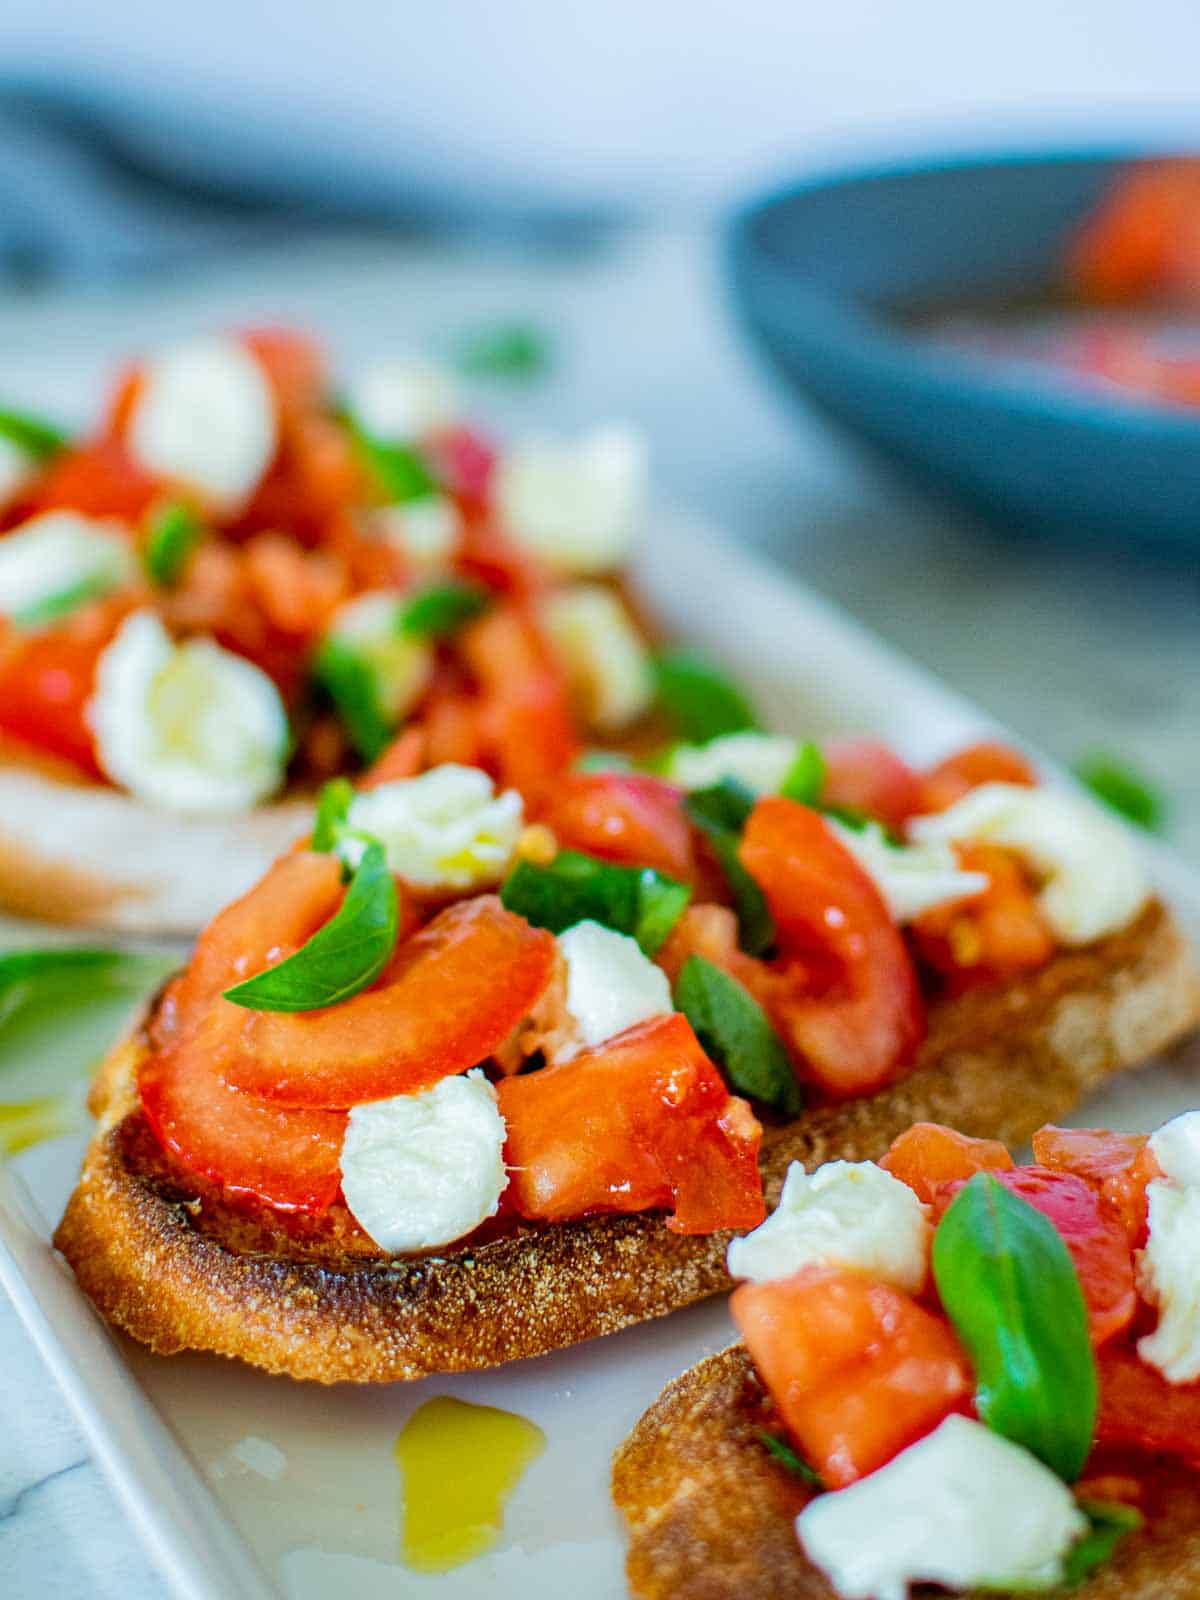 Bruschetta with mozzarella and tomatoes on a white plate.